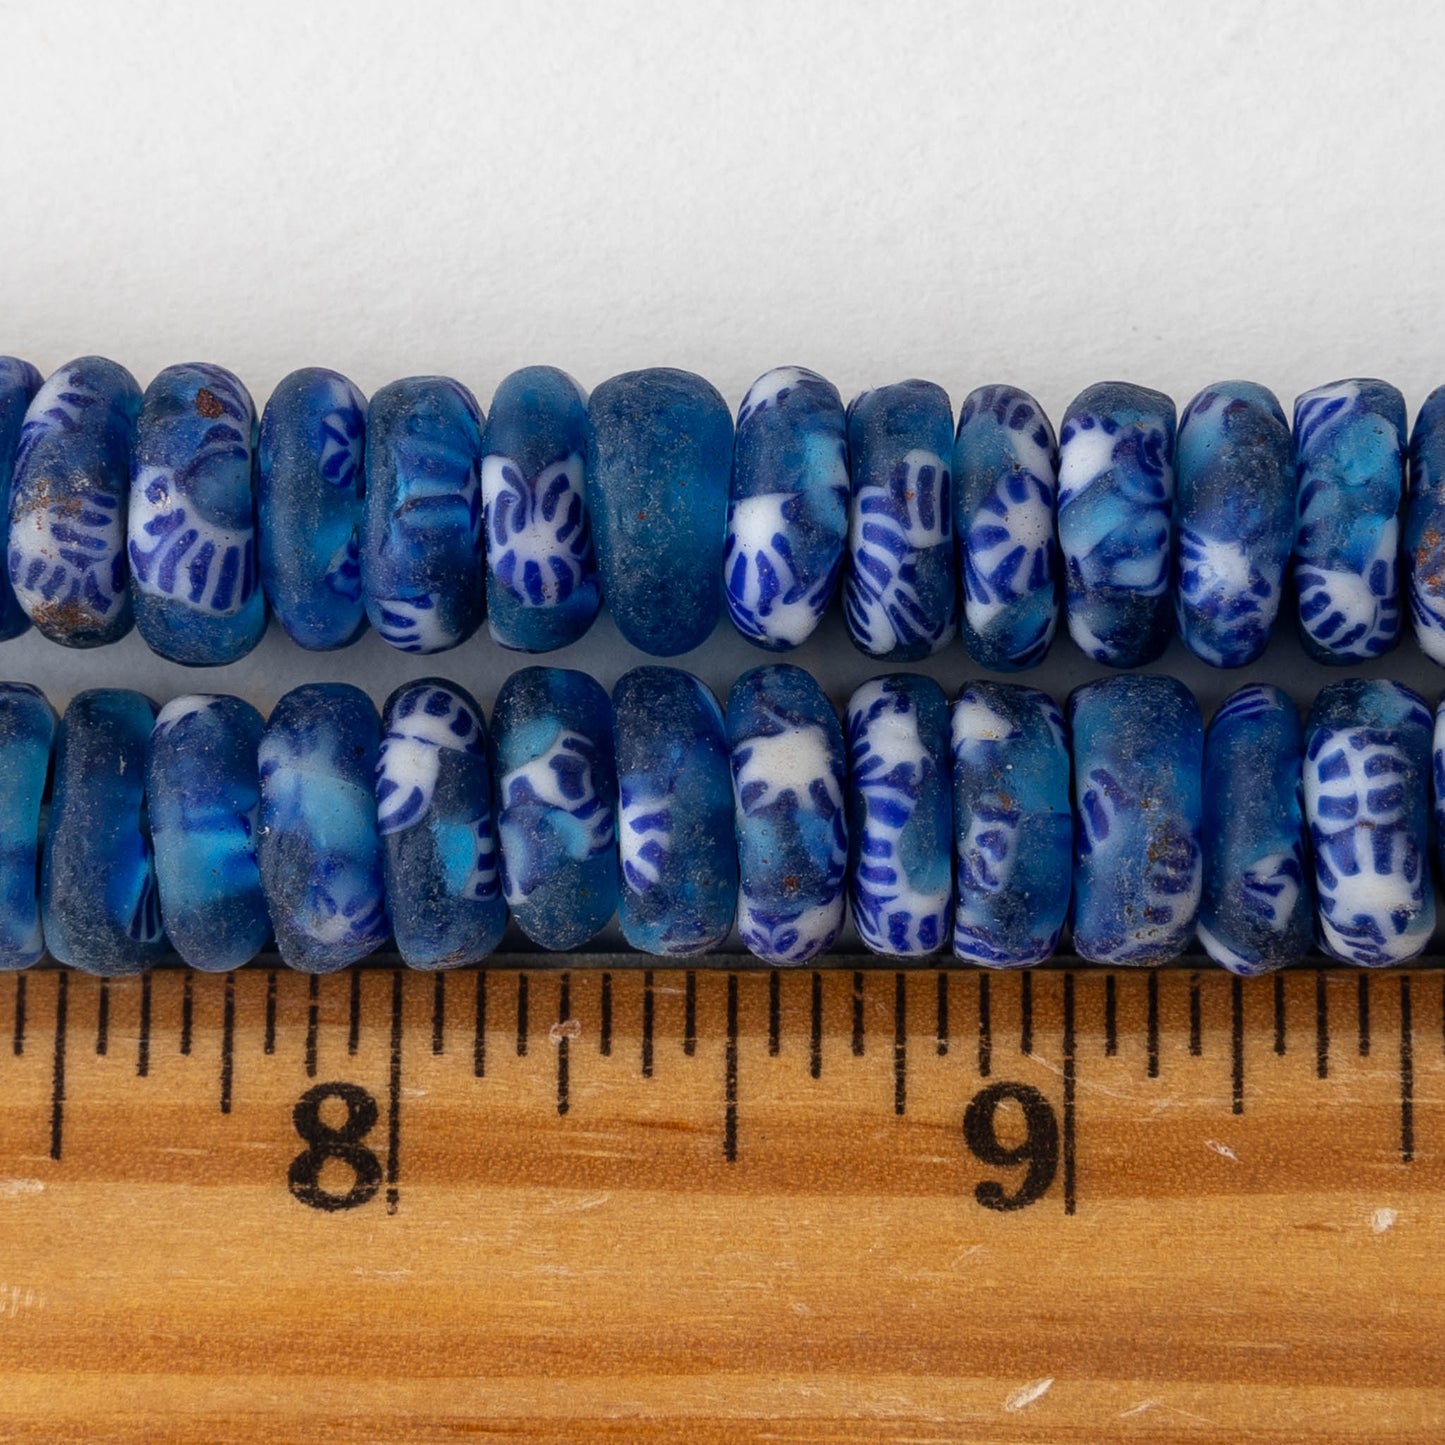 10mm Krobo Donut Beads  - Blue and Blue - 10 inches